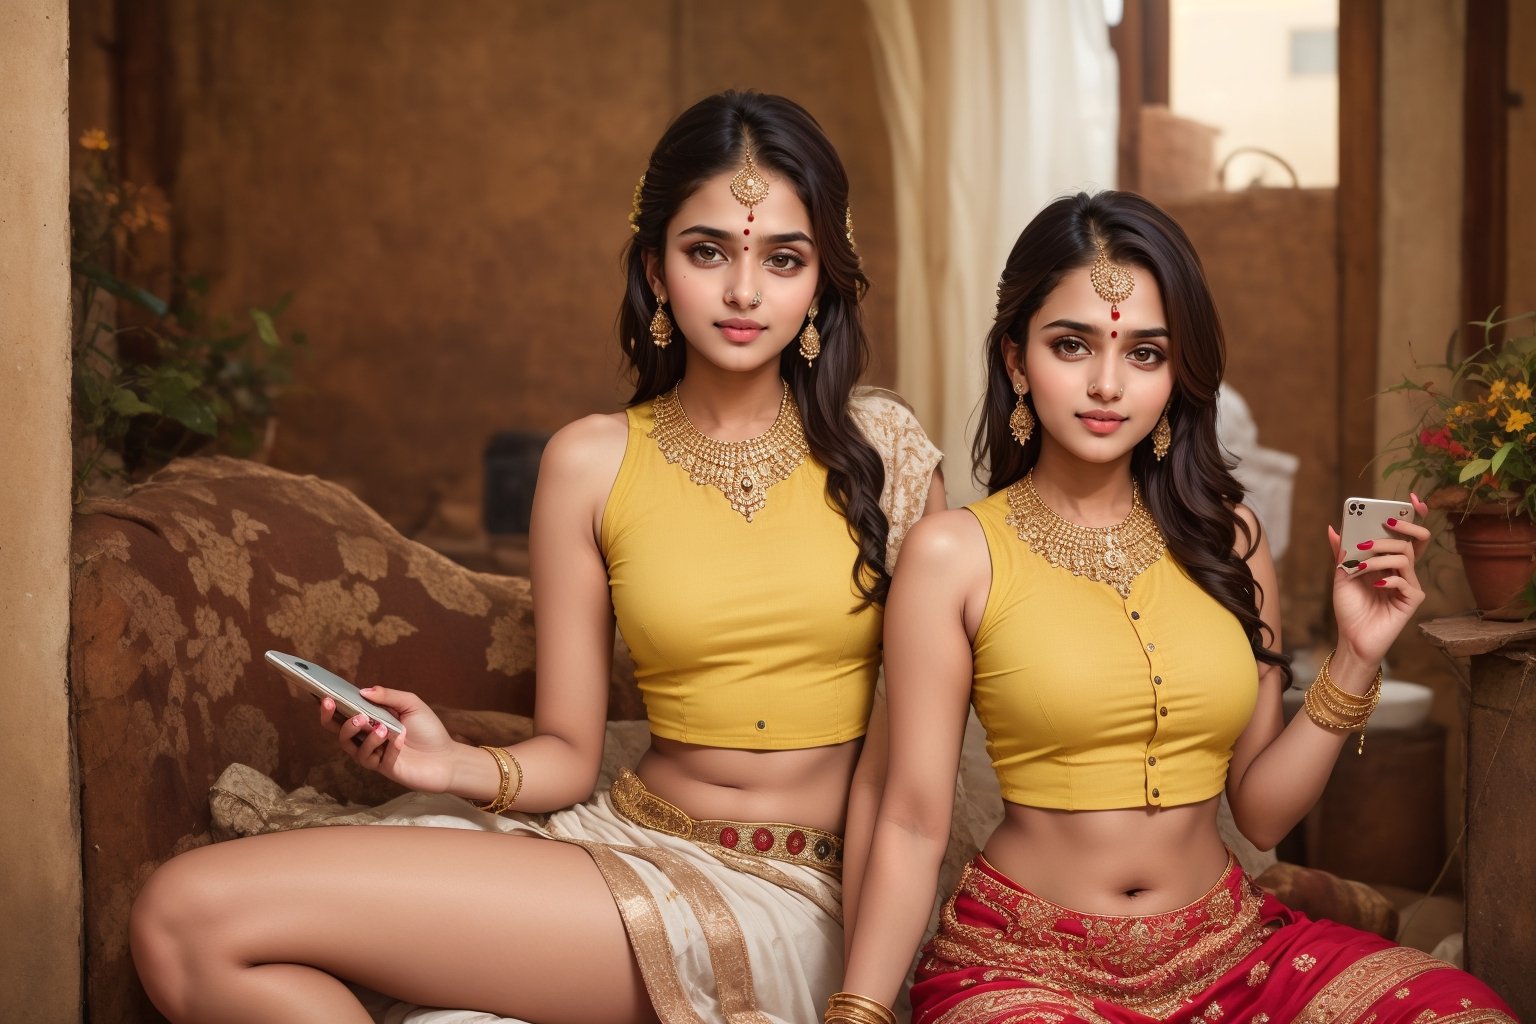 lovely  cute  young  attractive  indian  teenage  girl  in  a  short yellow  crop  top  ,  23  years  old  ,  cute  ,  an  Instagram  model  ,  long  blonde_hair  ,  colorful  hair    ,  playing song on mobile   in the room .  ,  „  Indian 